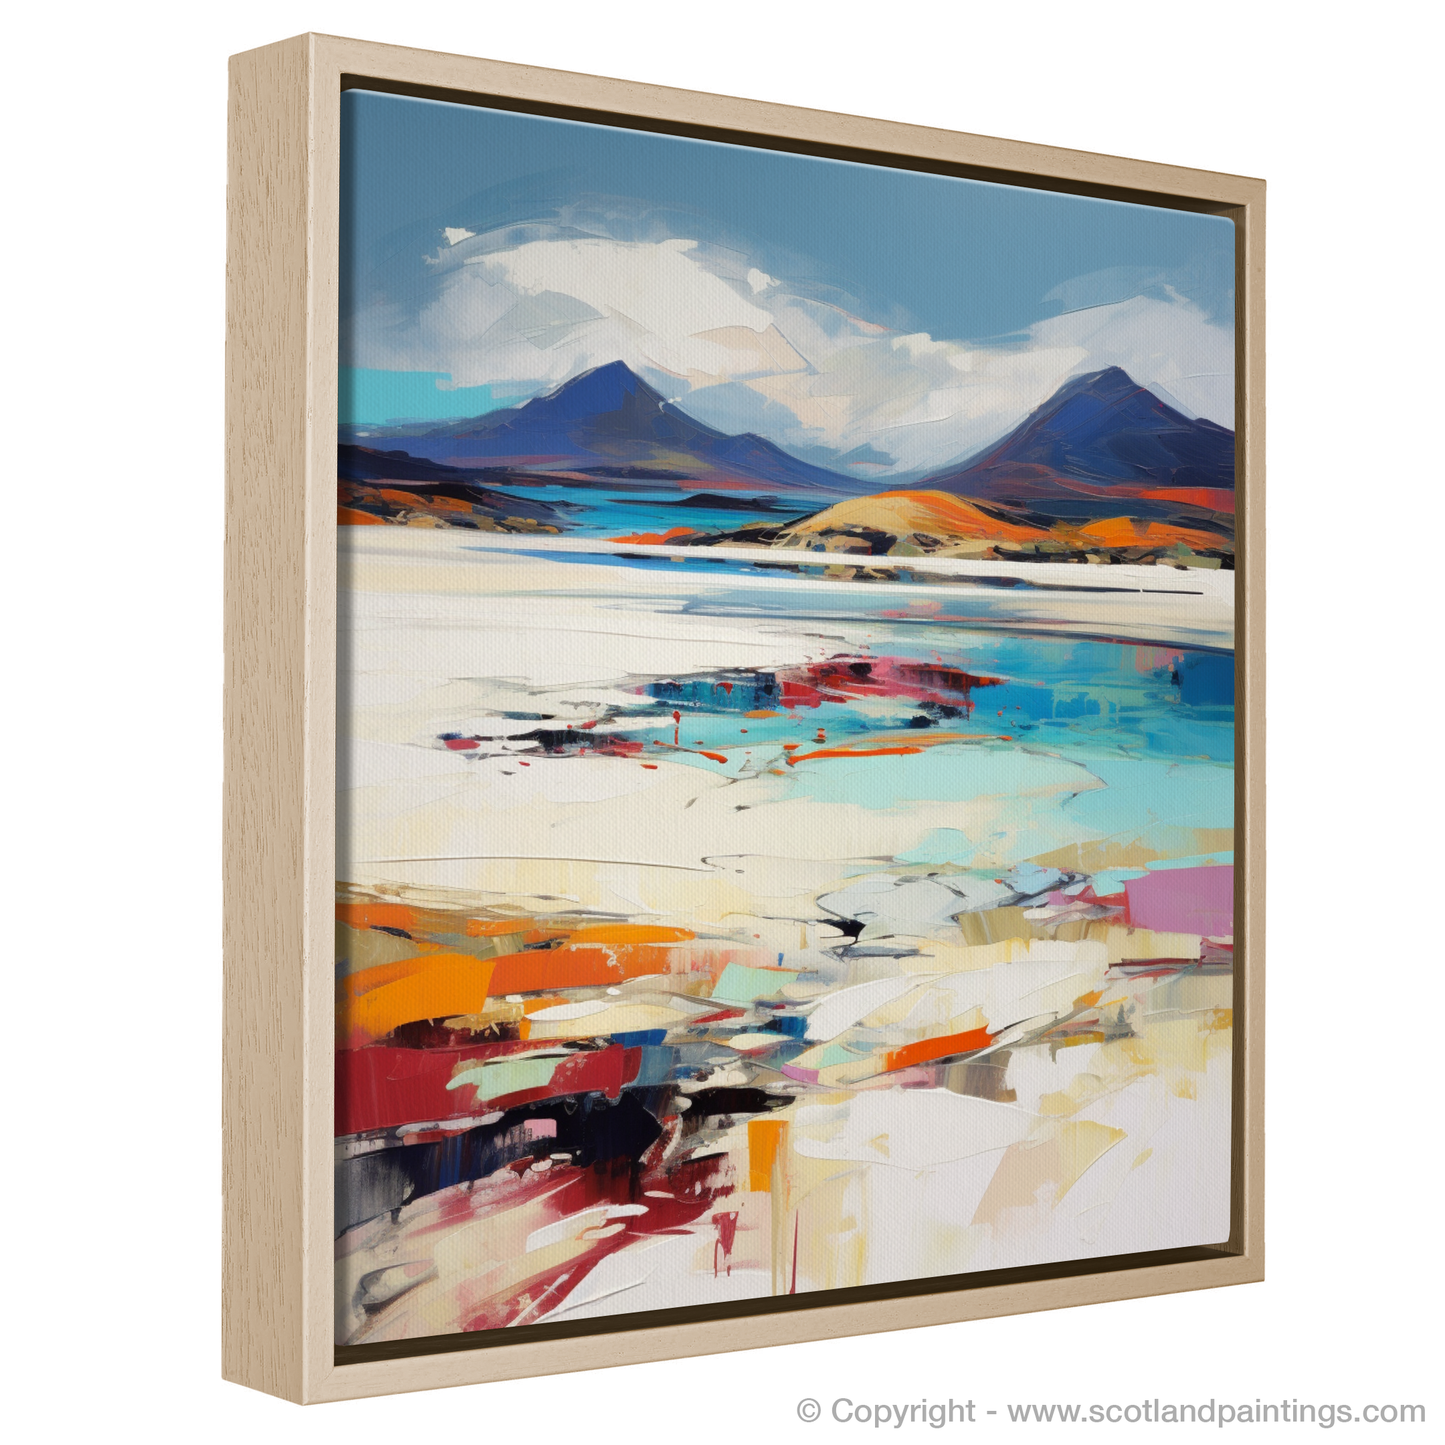 Painting and Art Print of Luskentyre Sands, Isle of Lewis entitled "Luskentyre Sands: An Expressionist Ode to Scottish Shores".